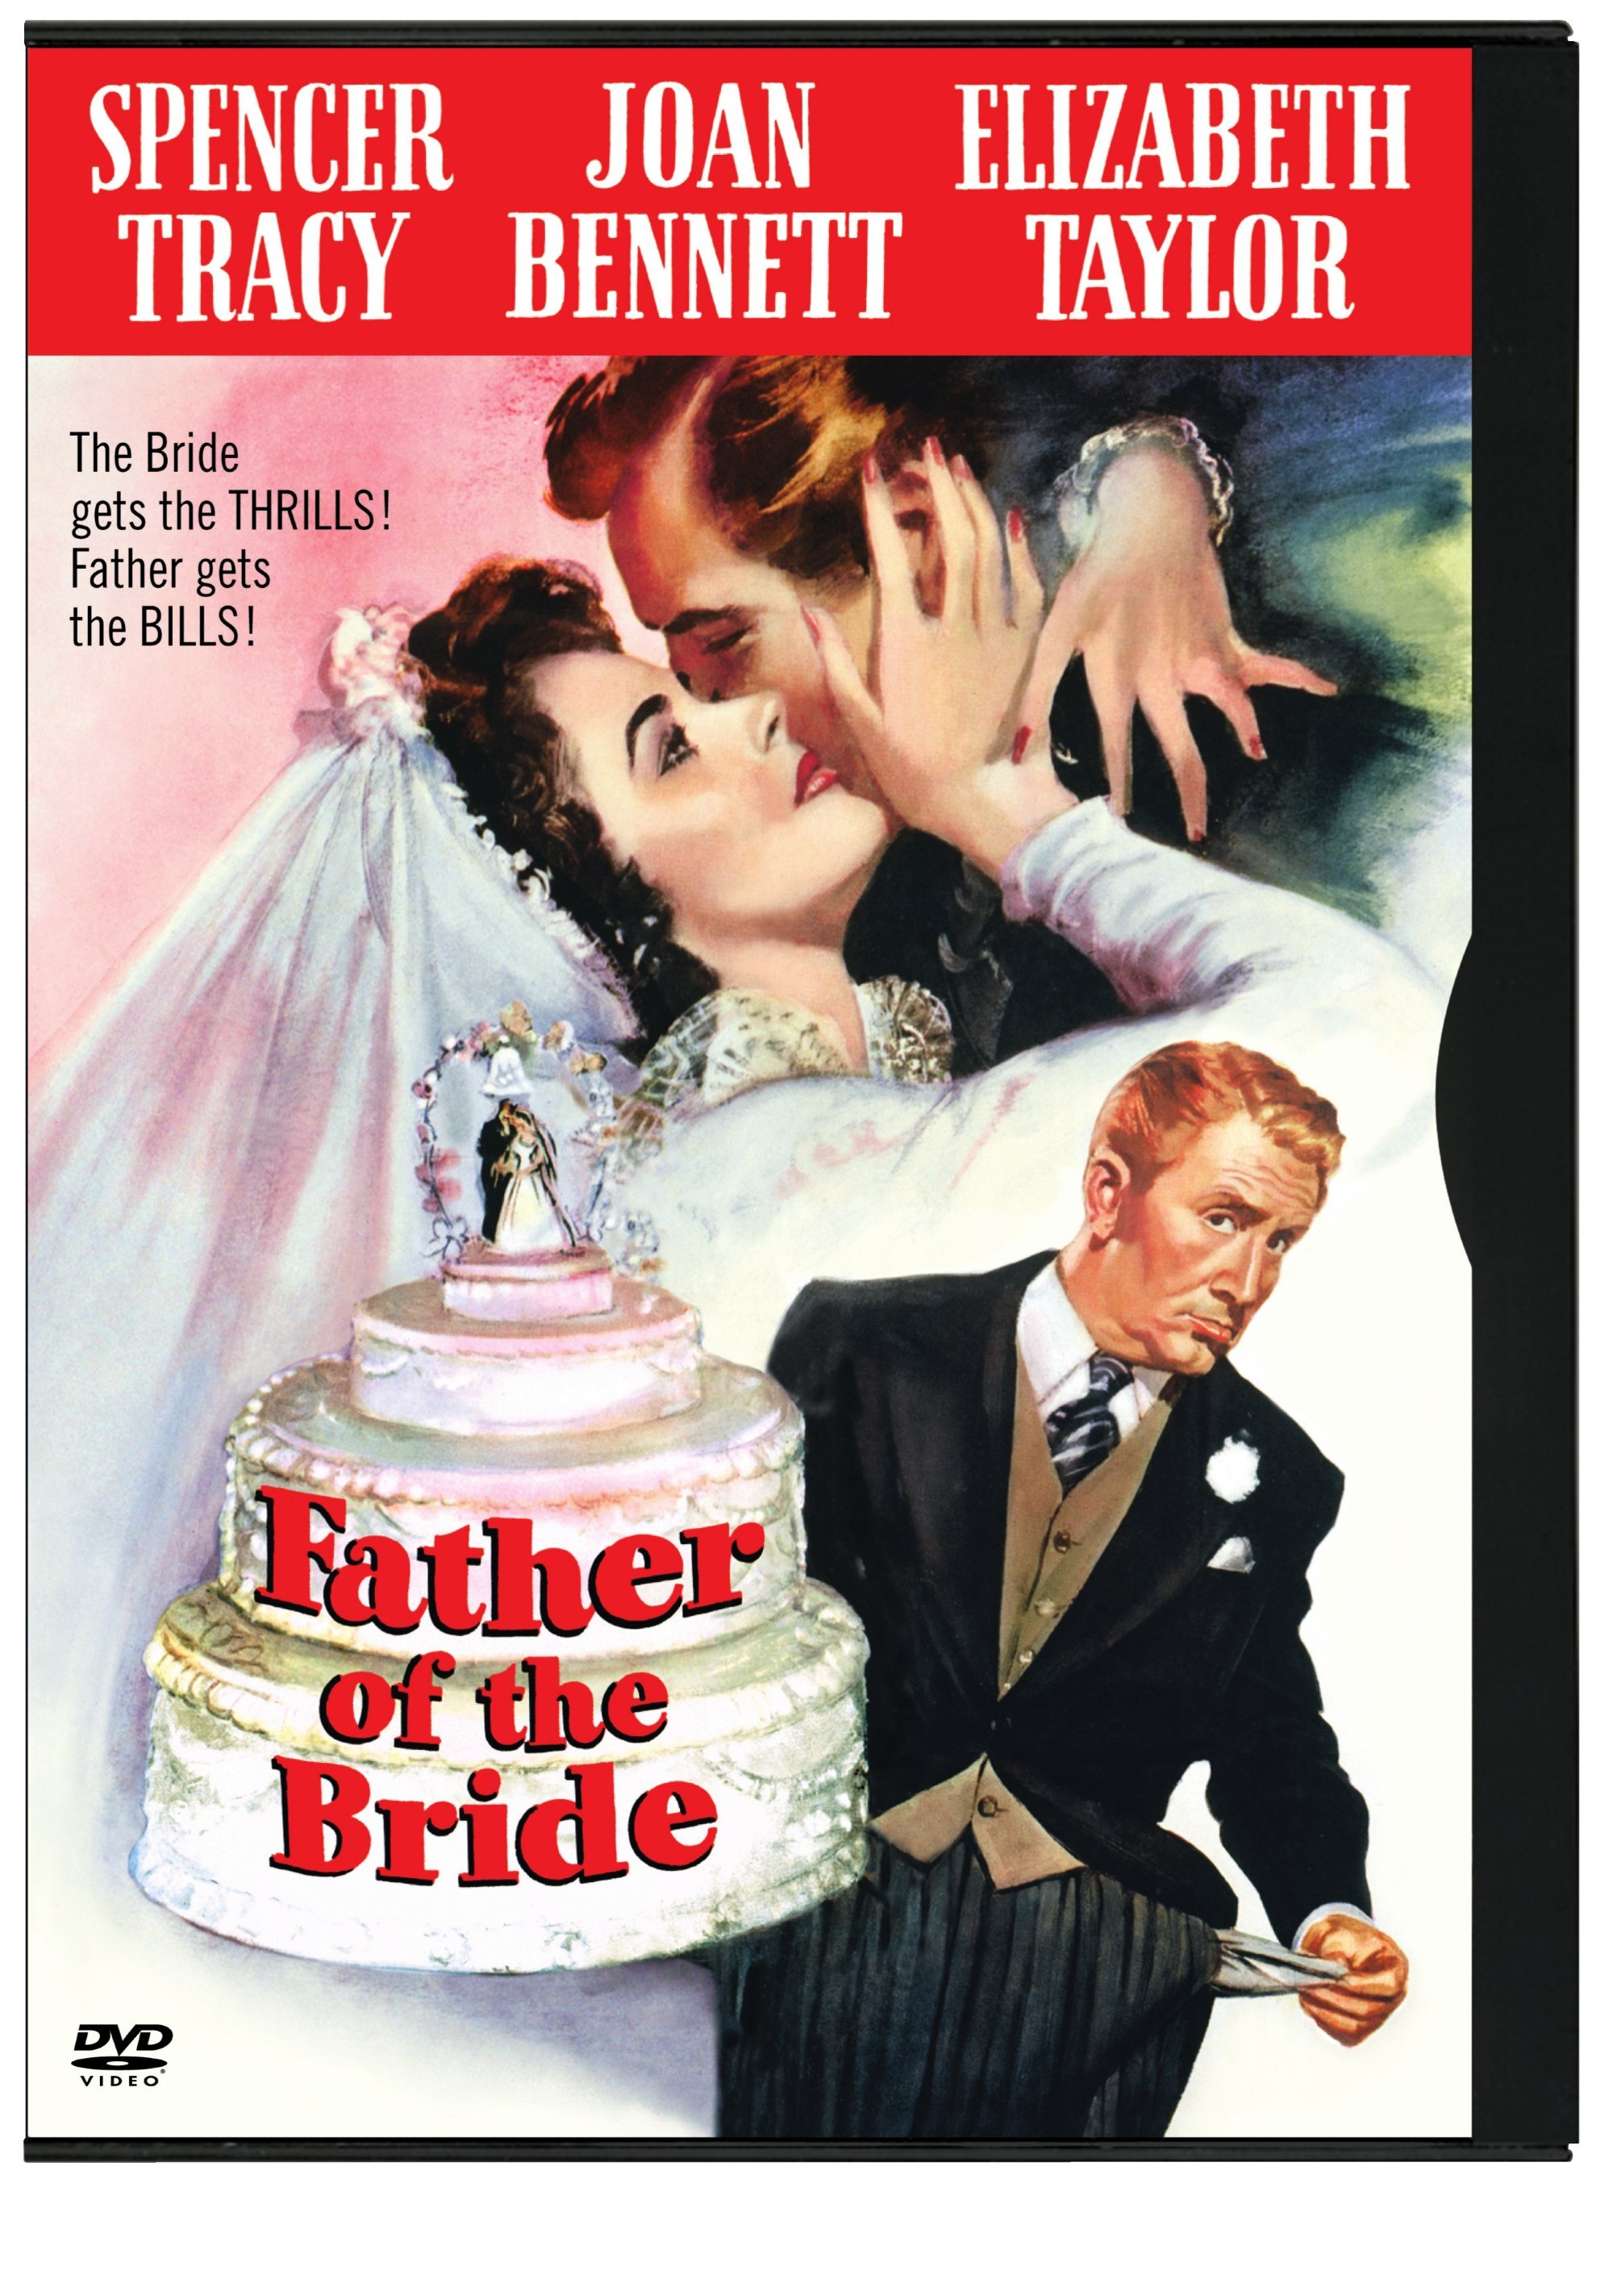 Father Of The Bride (DVD New Box Art) - DVD [ 1950 ]  - Comedy Movies On DVD - Movies On GRUV